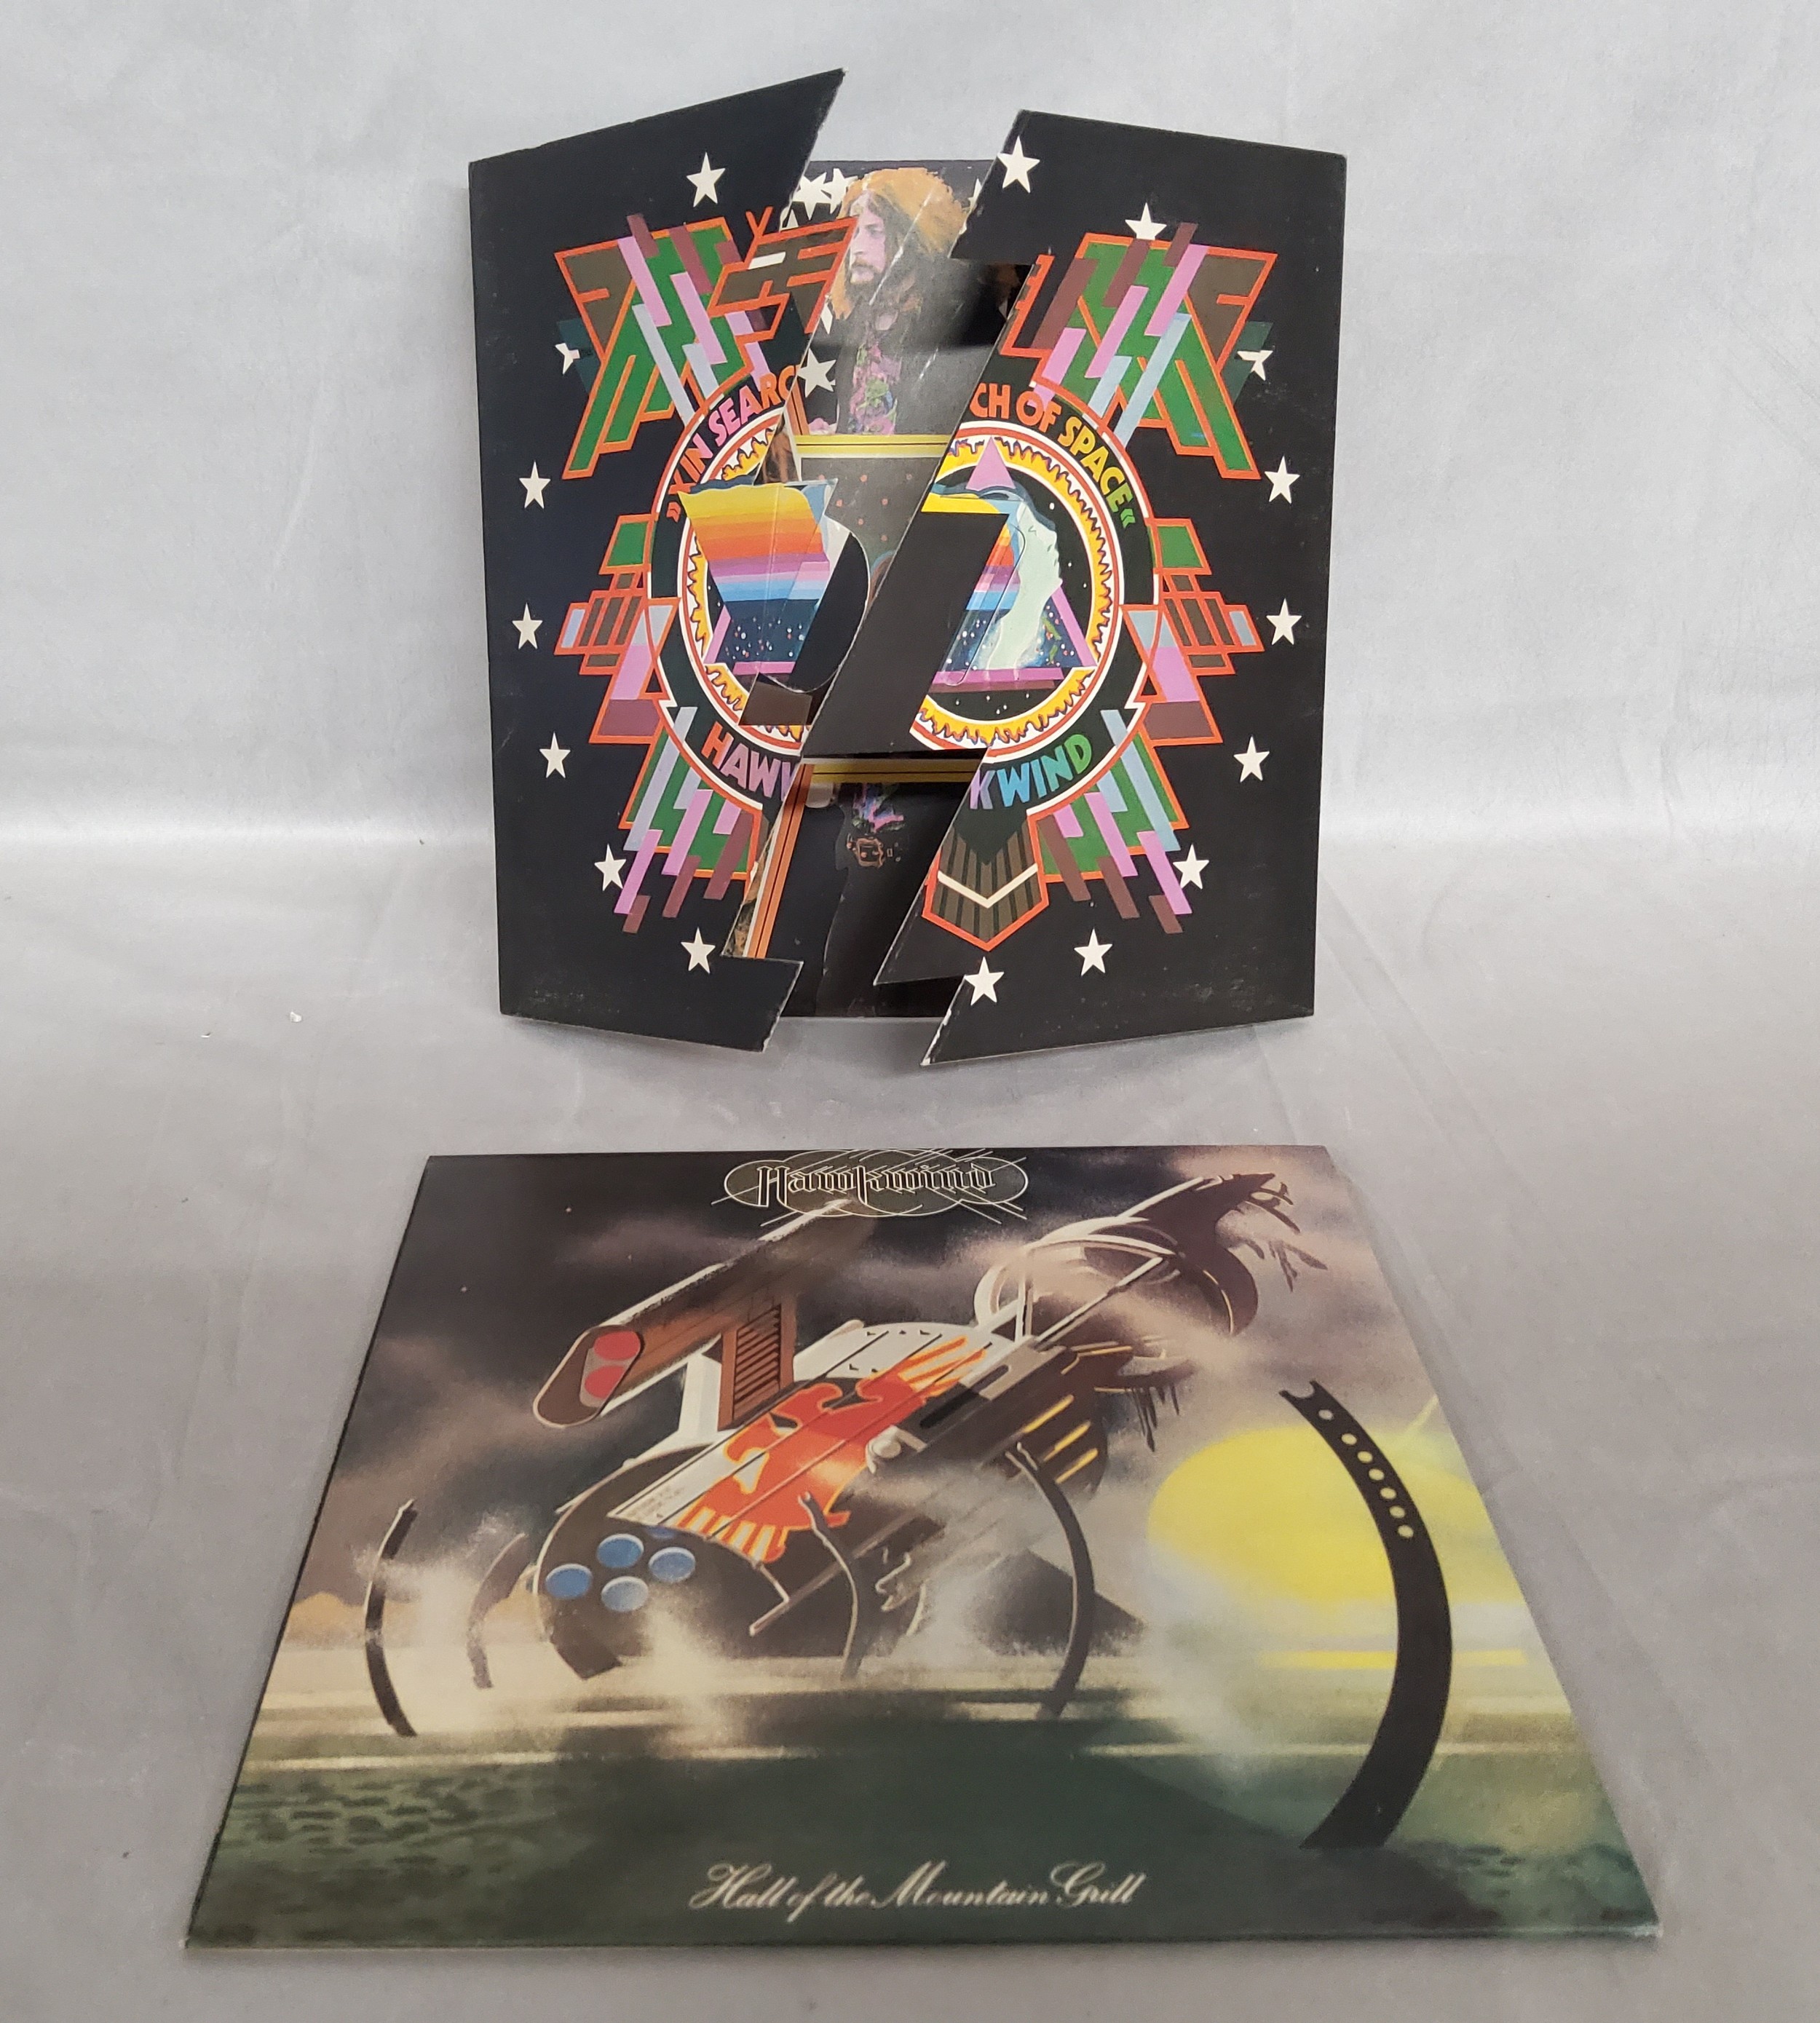 Hawkwind X In Search Of Space, Gimmix Cover + mint logbook, UAG 29202, UAG 29202 A-1U; Hall of the